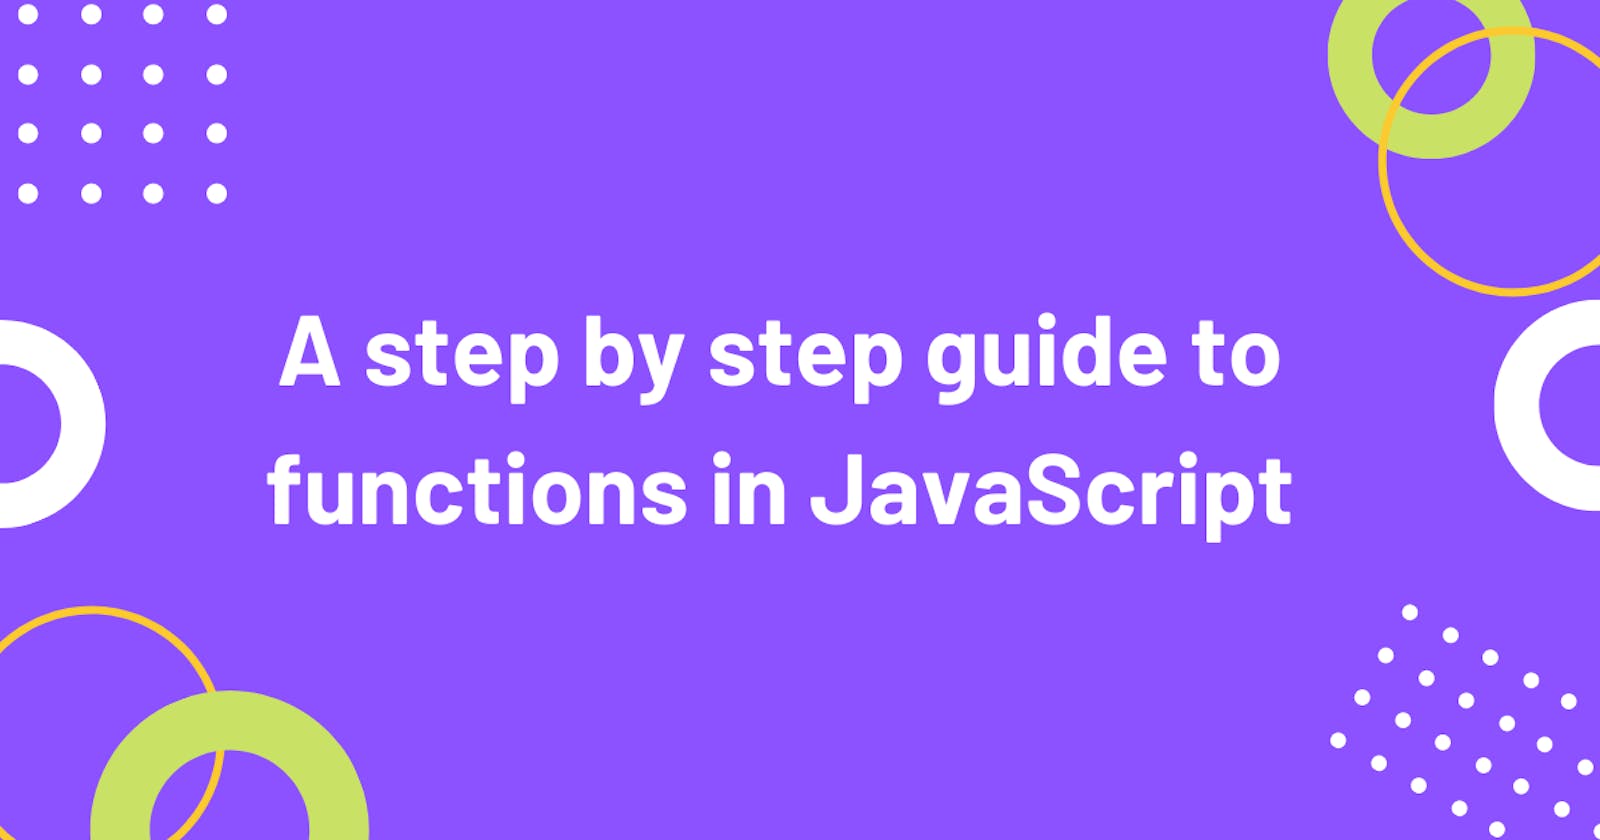 A step by step guide to functions in JavaScript